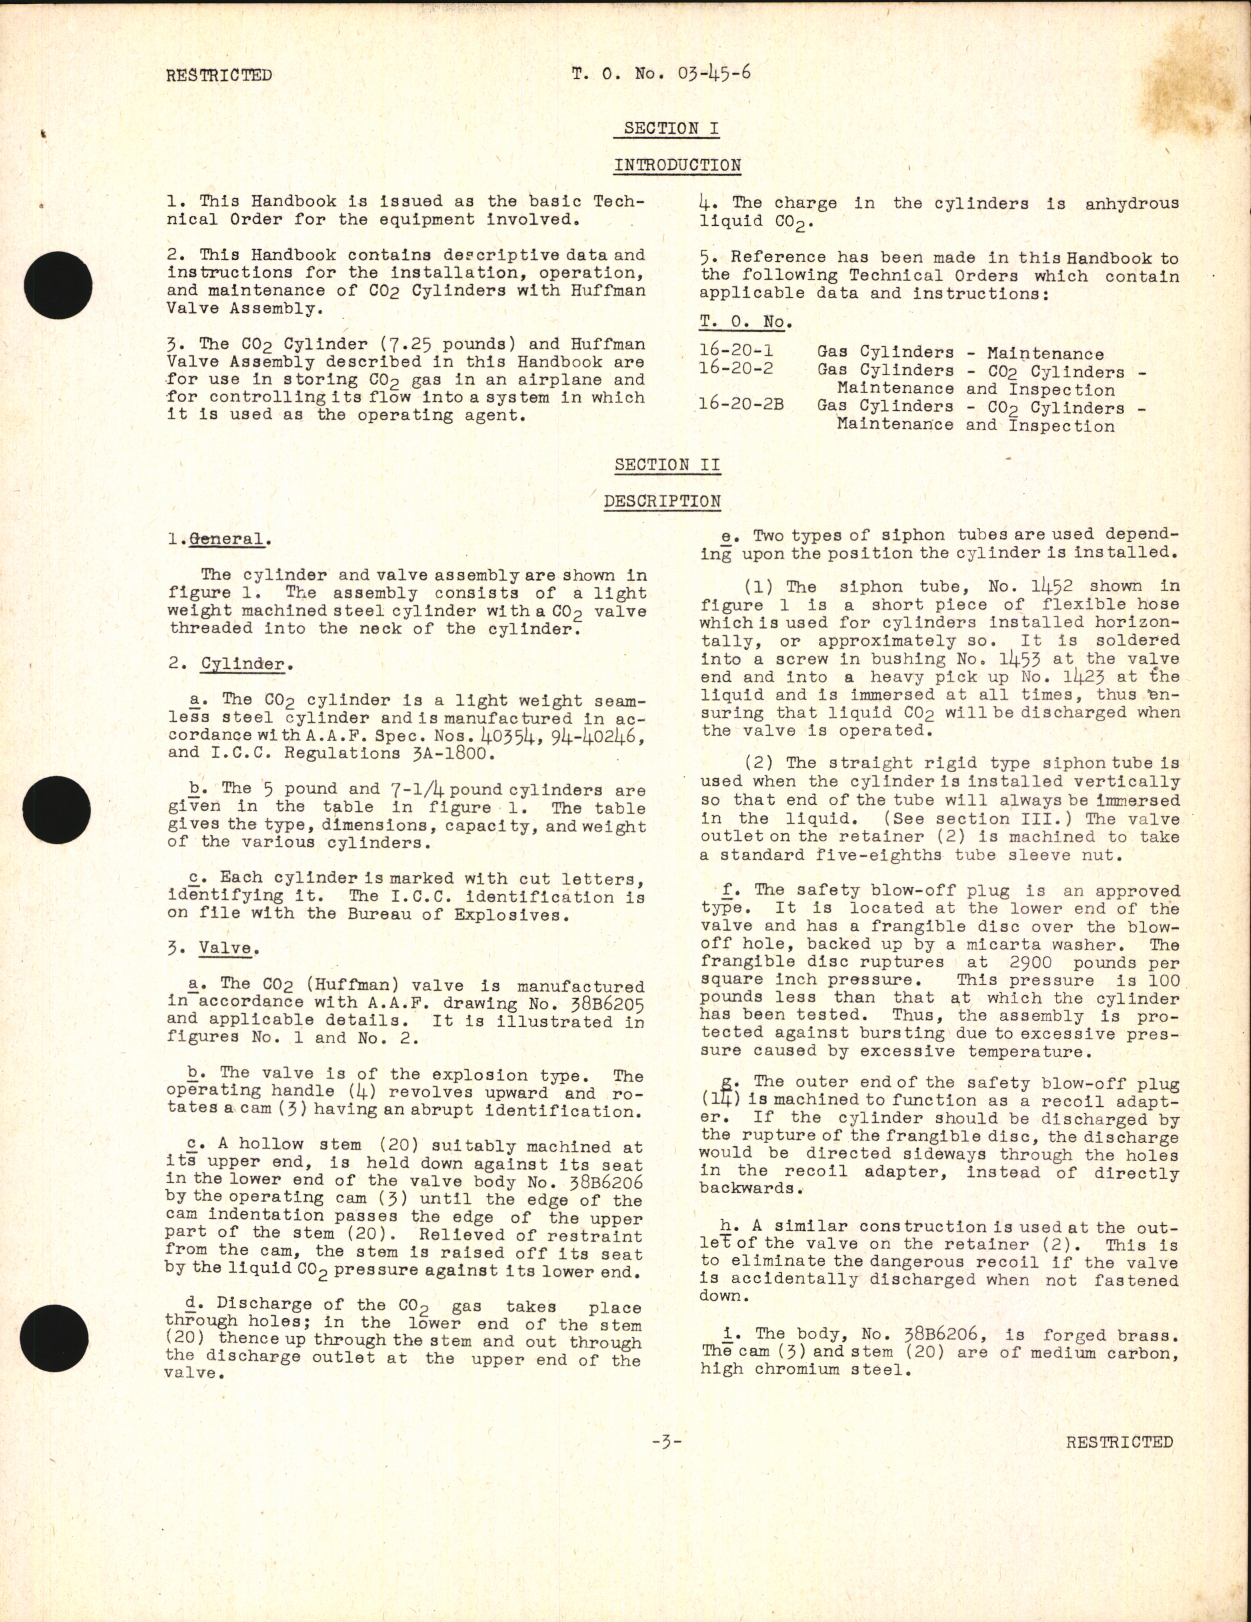 Sample page 5 from AirCorps Library document: Handbook of Instructions for Huffman CO2 Cylinder and Valve Assembly